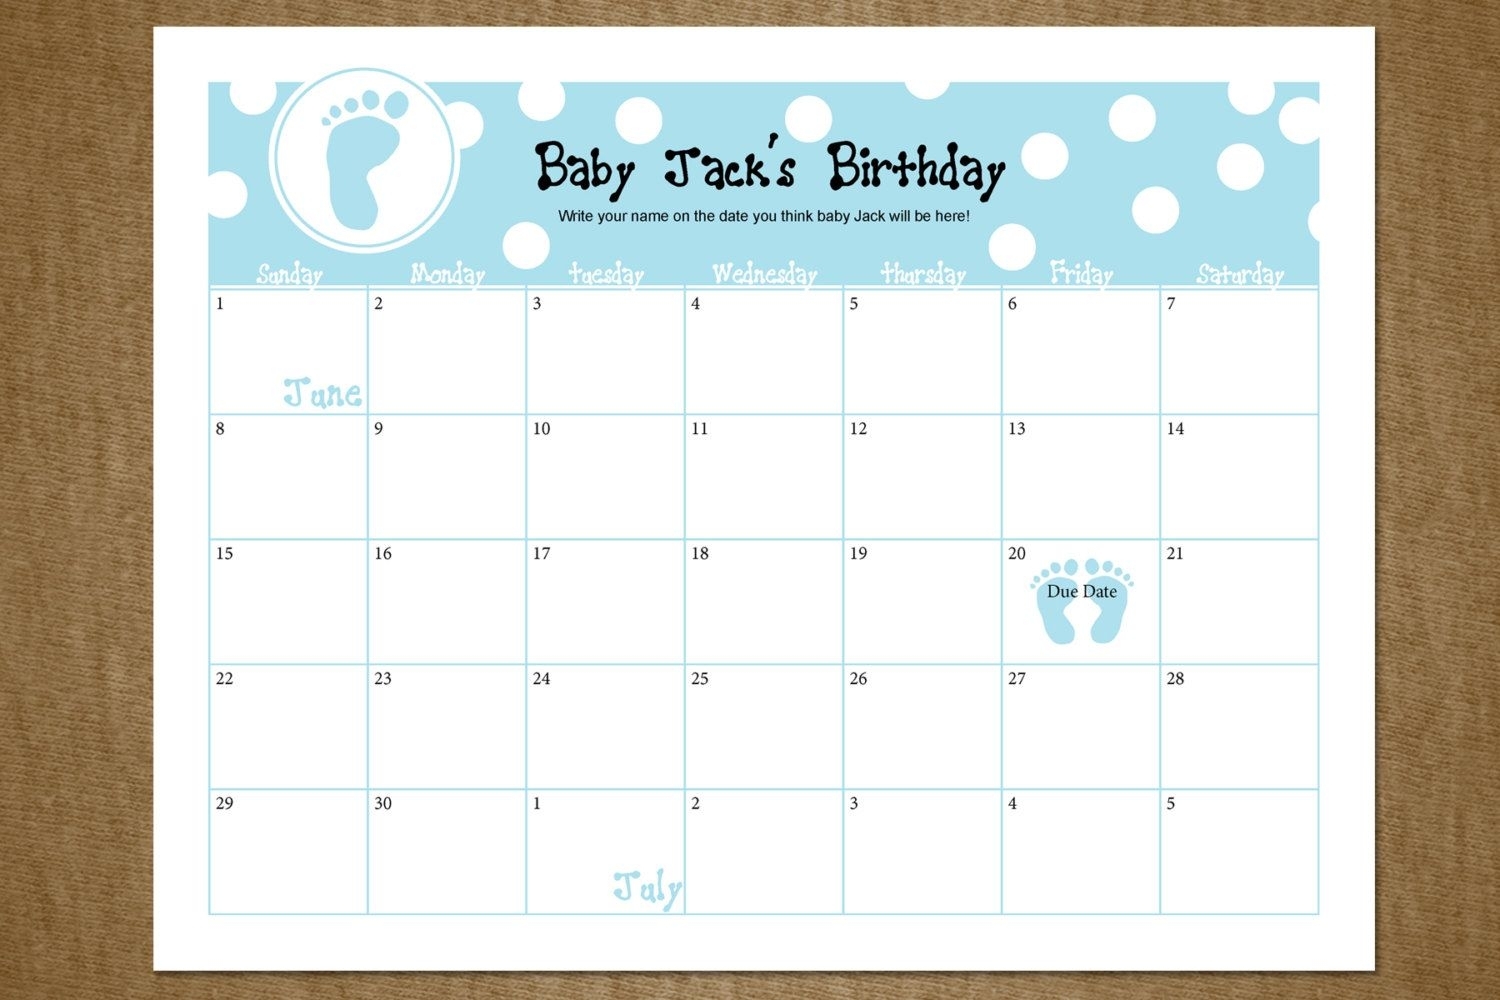 guess the date baby pool for baby shower 57